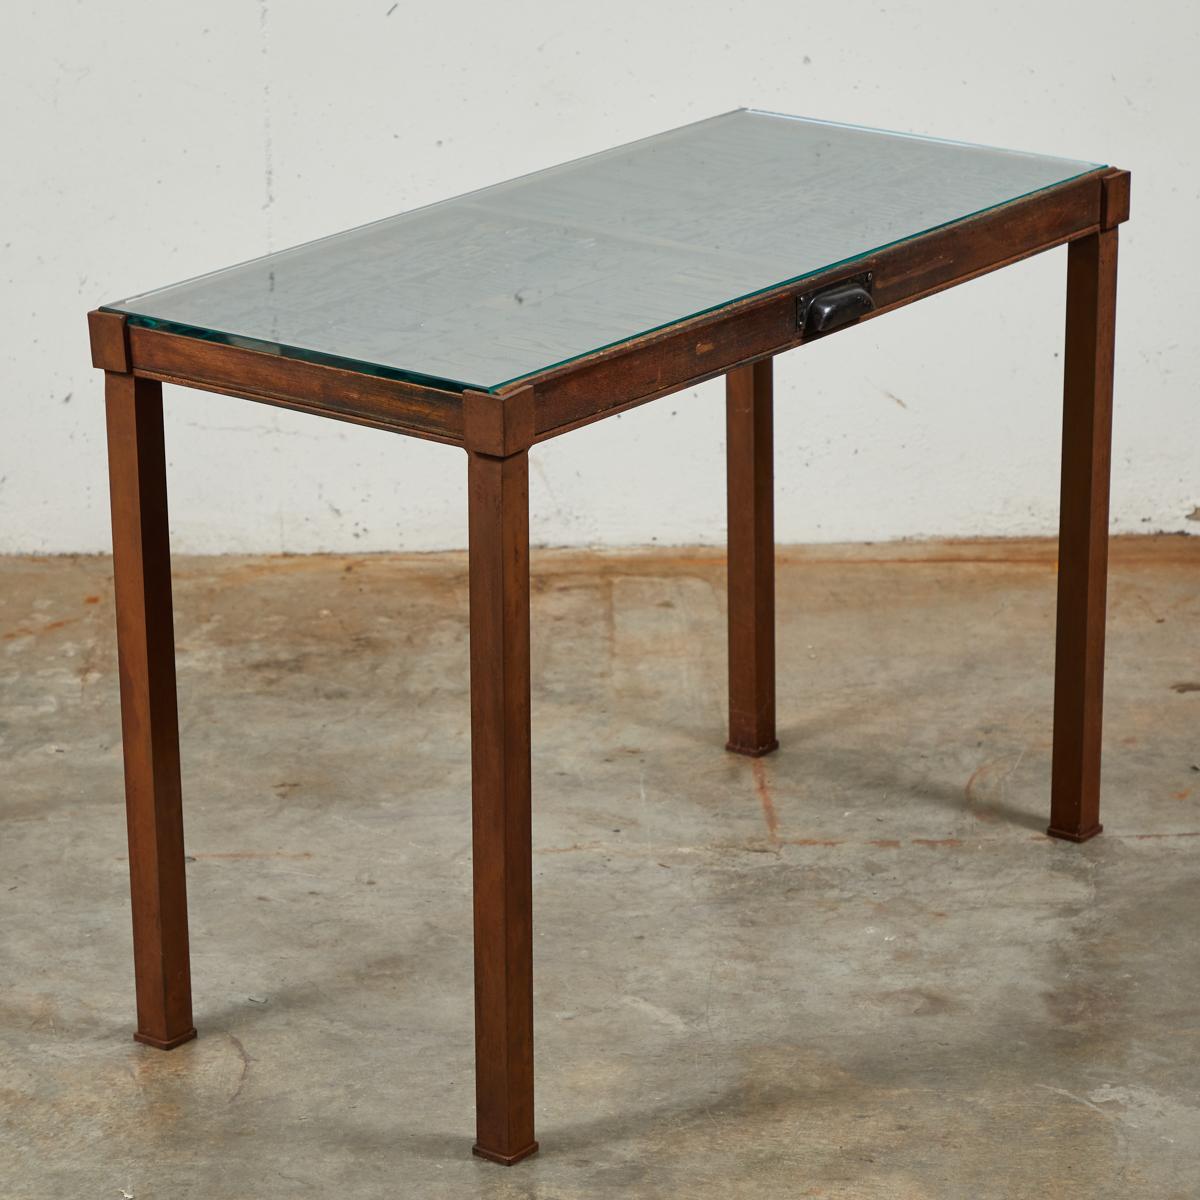 Late 19th Century Industrial Typeset Metal Table For Sale 3